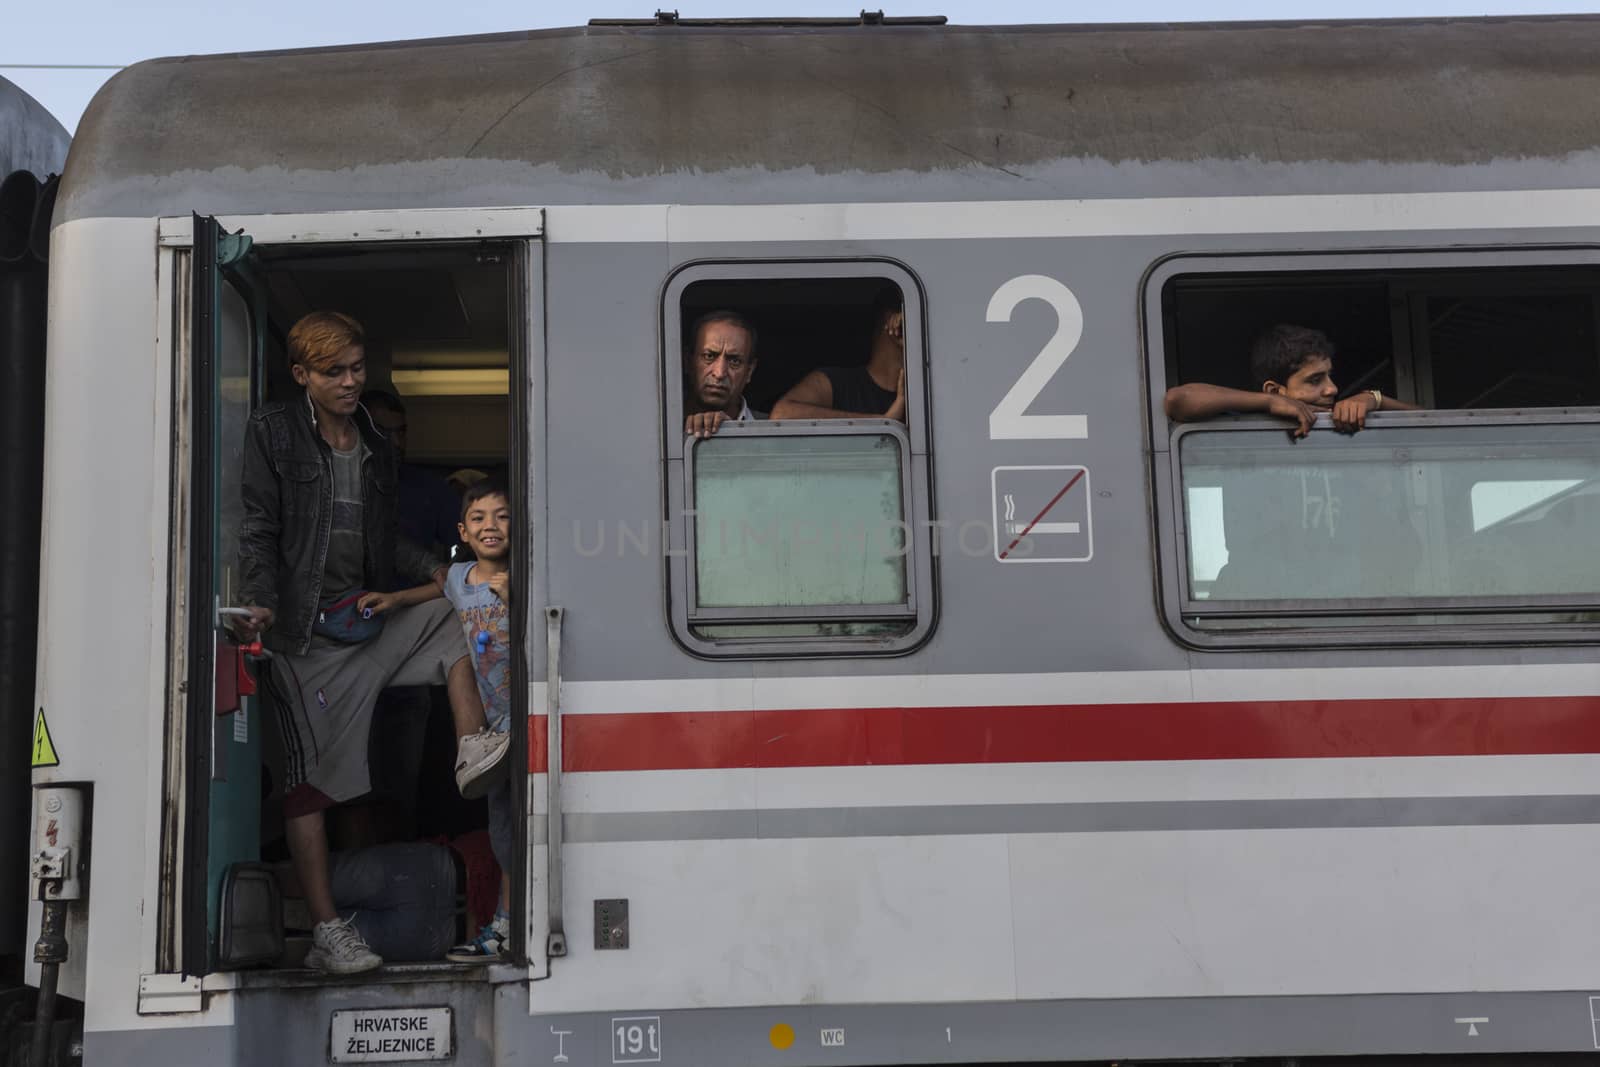 CROATIA, Tovarnik: Refugees board a train at the railway station in Tovarnik, Croatia near the Serbian-border on September 18, 2015. Refugees are hoping to continue their journey to Germany and Northern Europe via Slovenia 